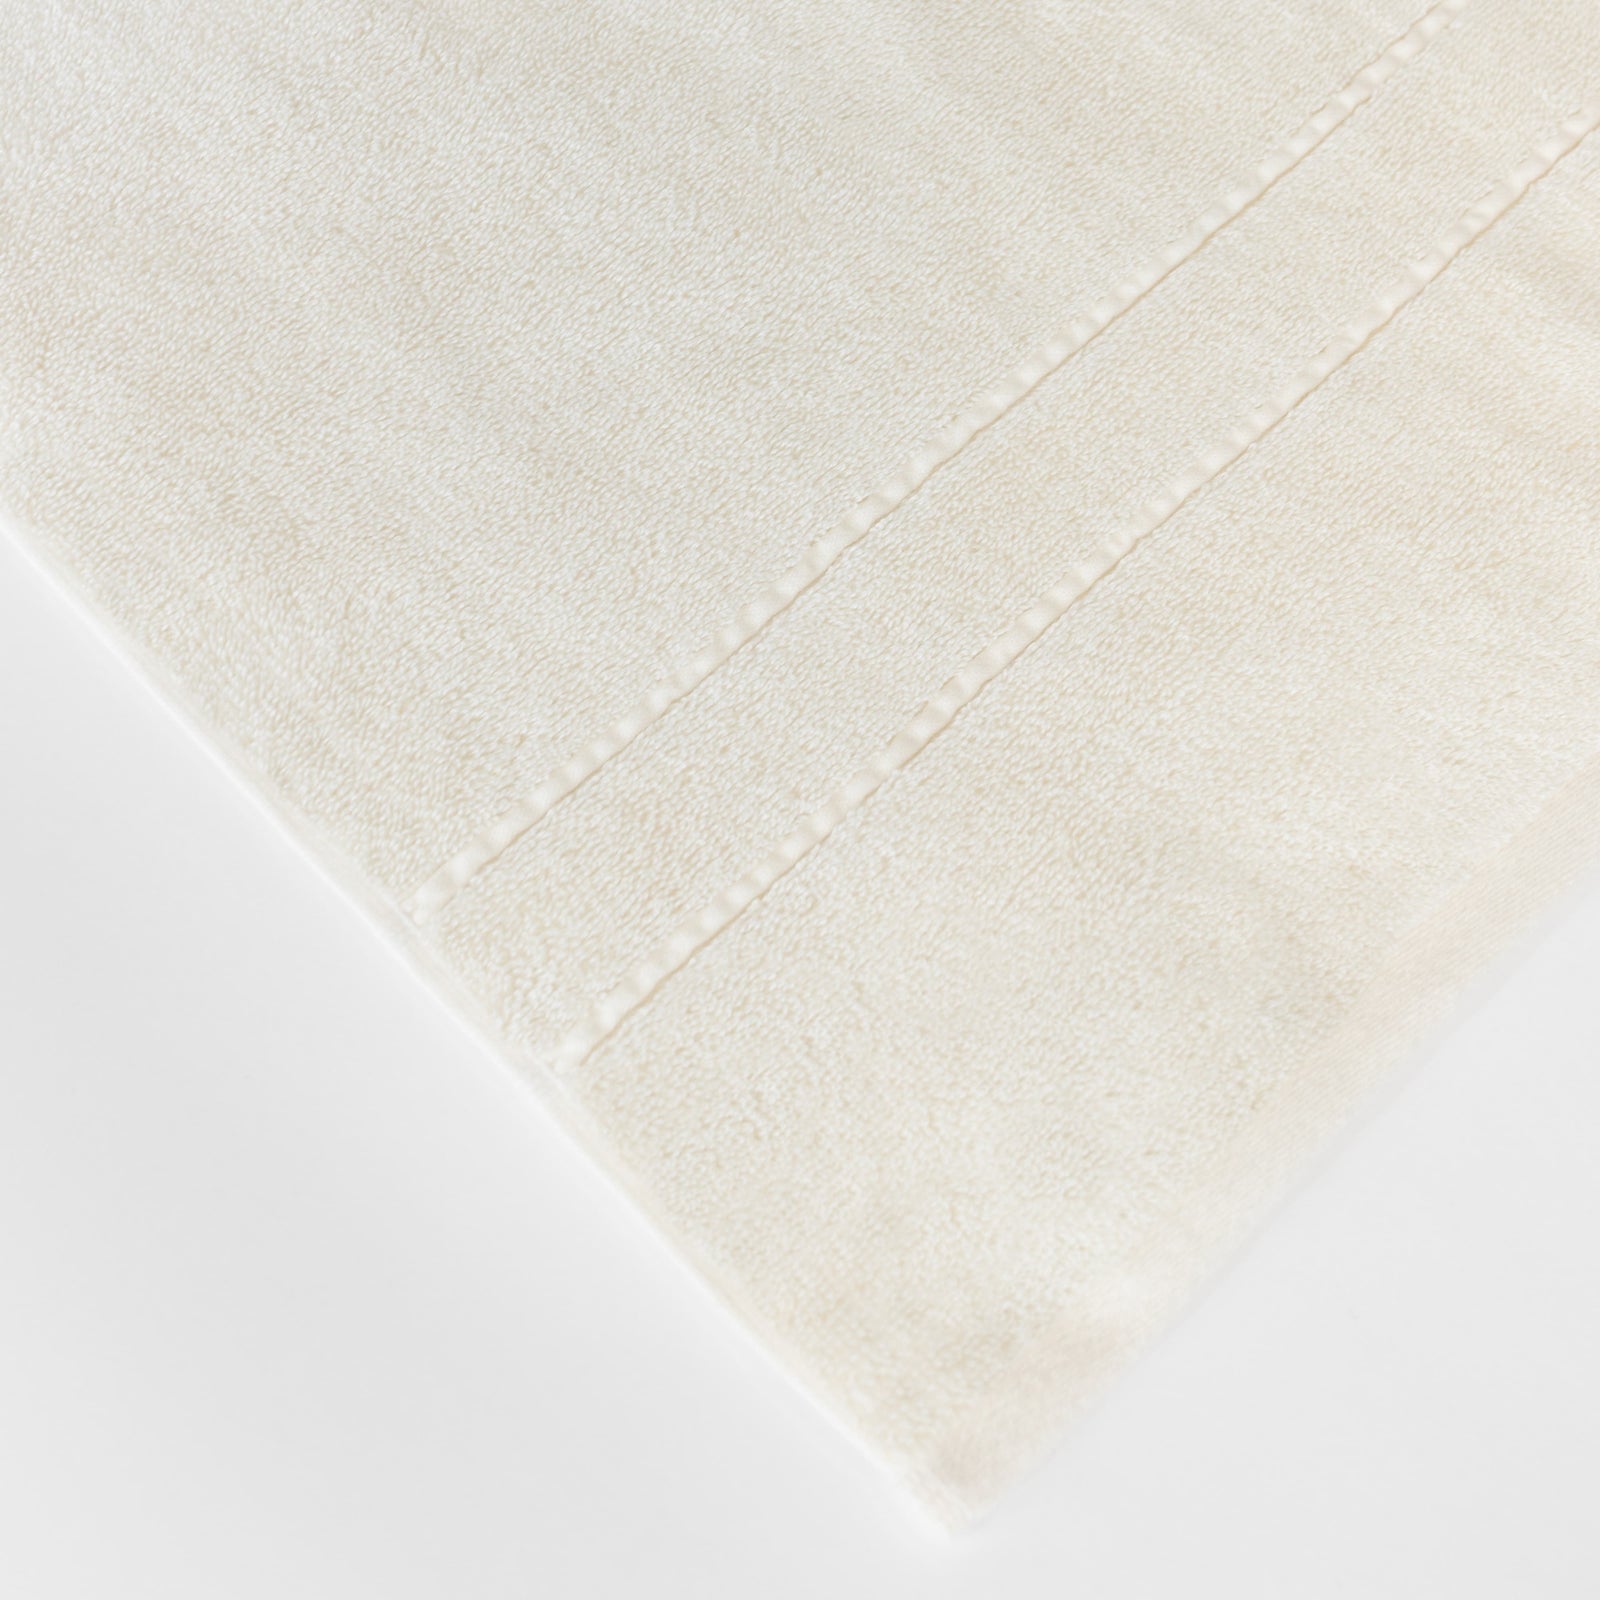 Premium Plush Bath Towels in the color Creme. Photo of Premium Plush Bath Towels taken on a white background showing only the corner of the towel. 